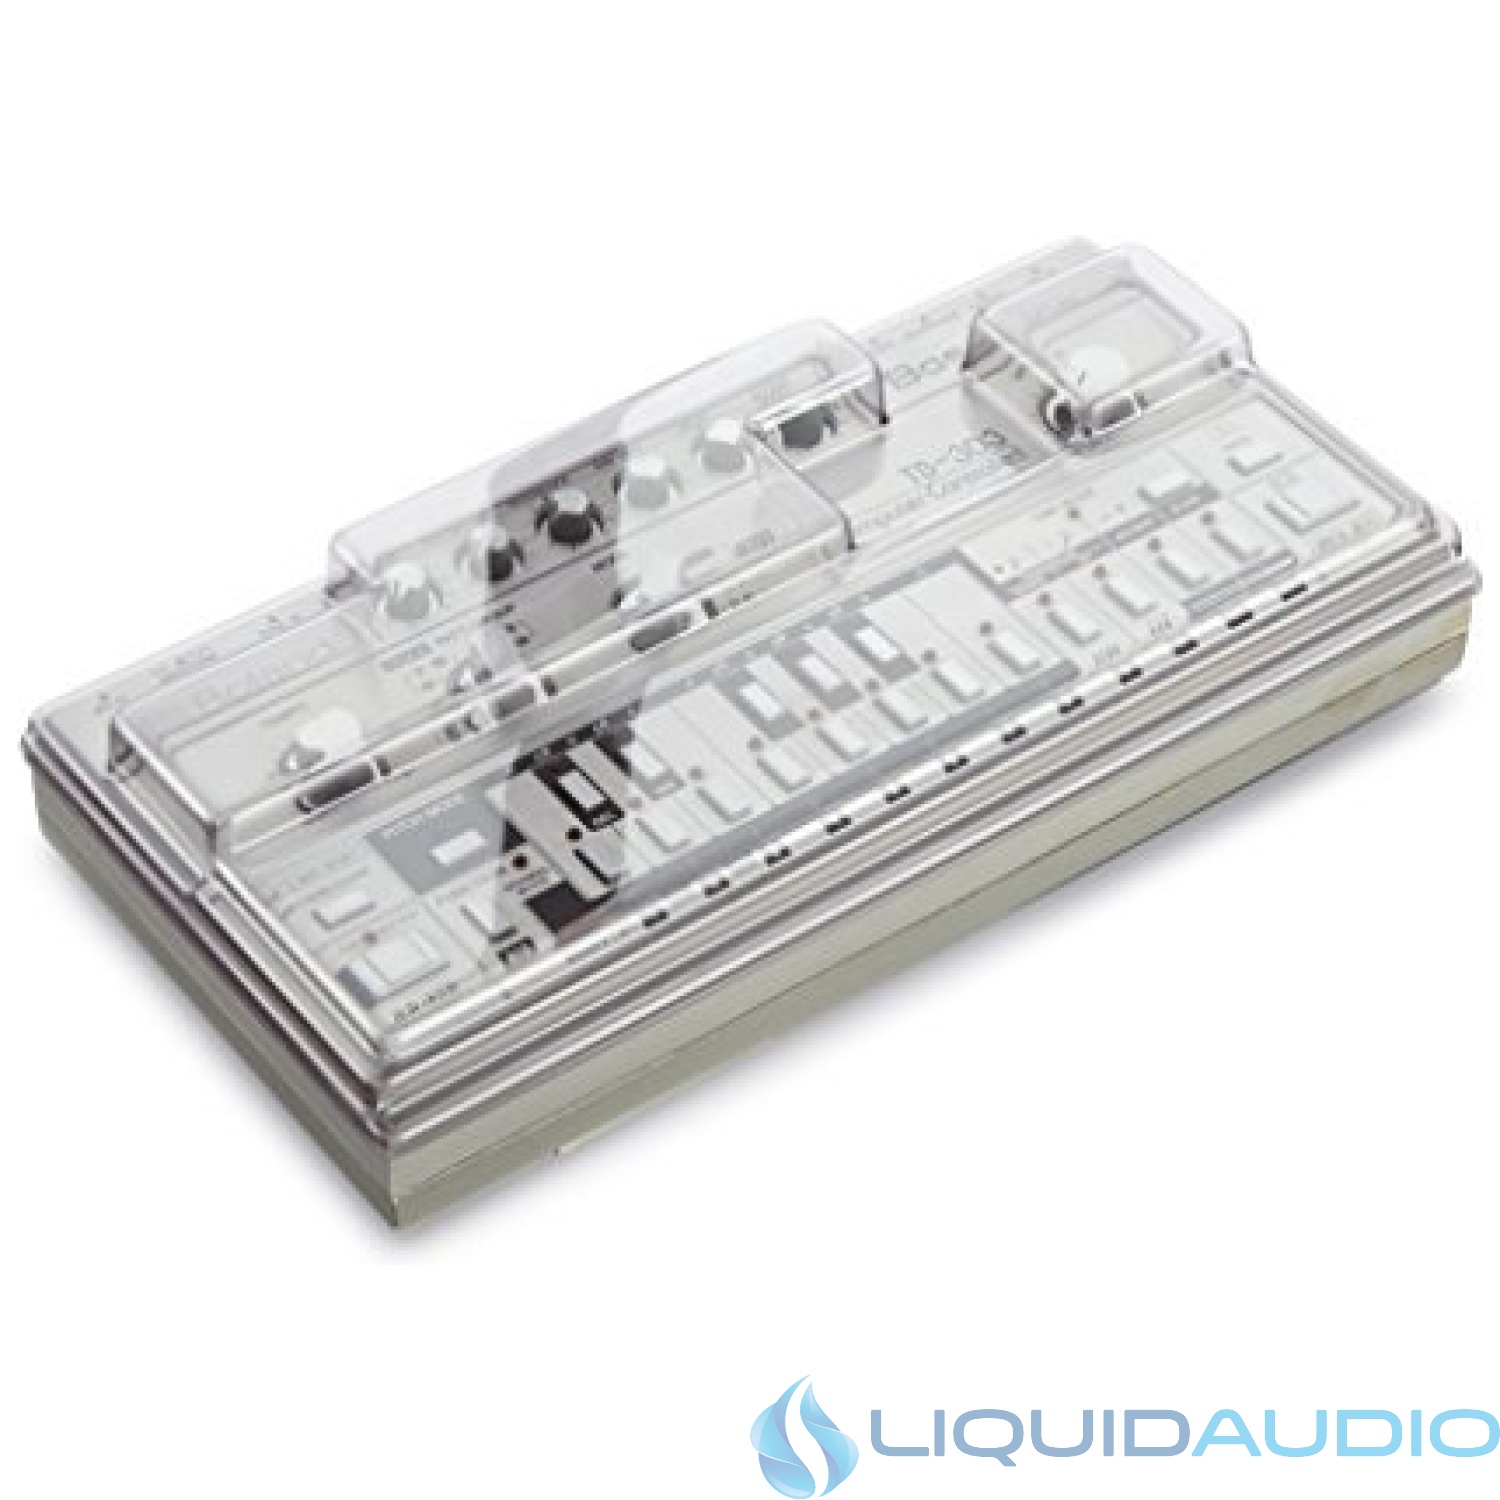 Decksaver Polycarbonate Cover for The Roland TB-303 Classic Bass Synth (DS-PC-TB303)